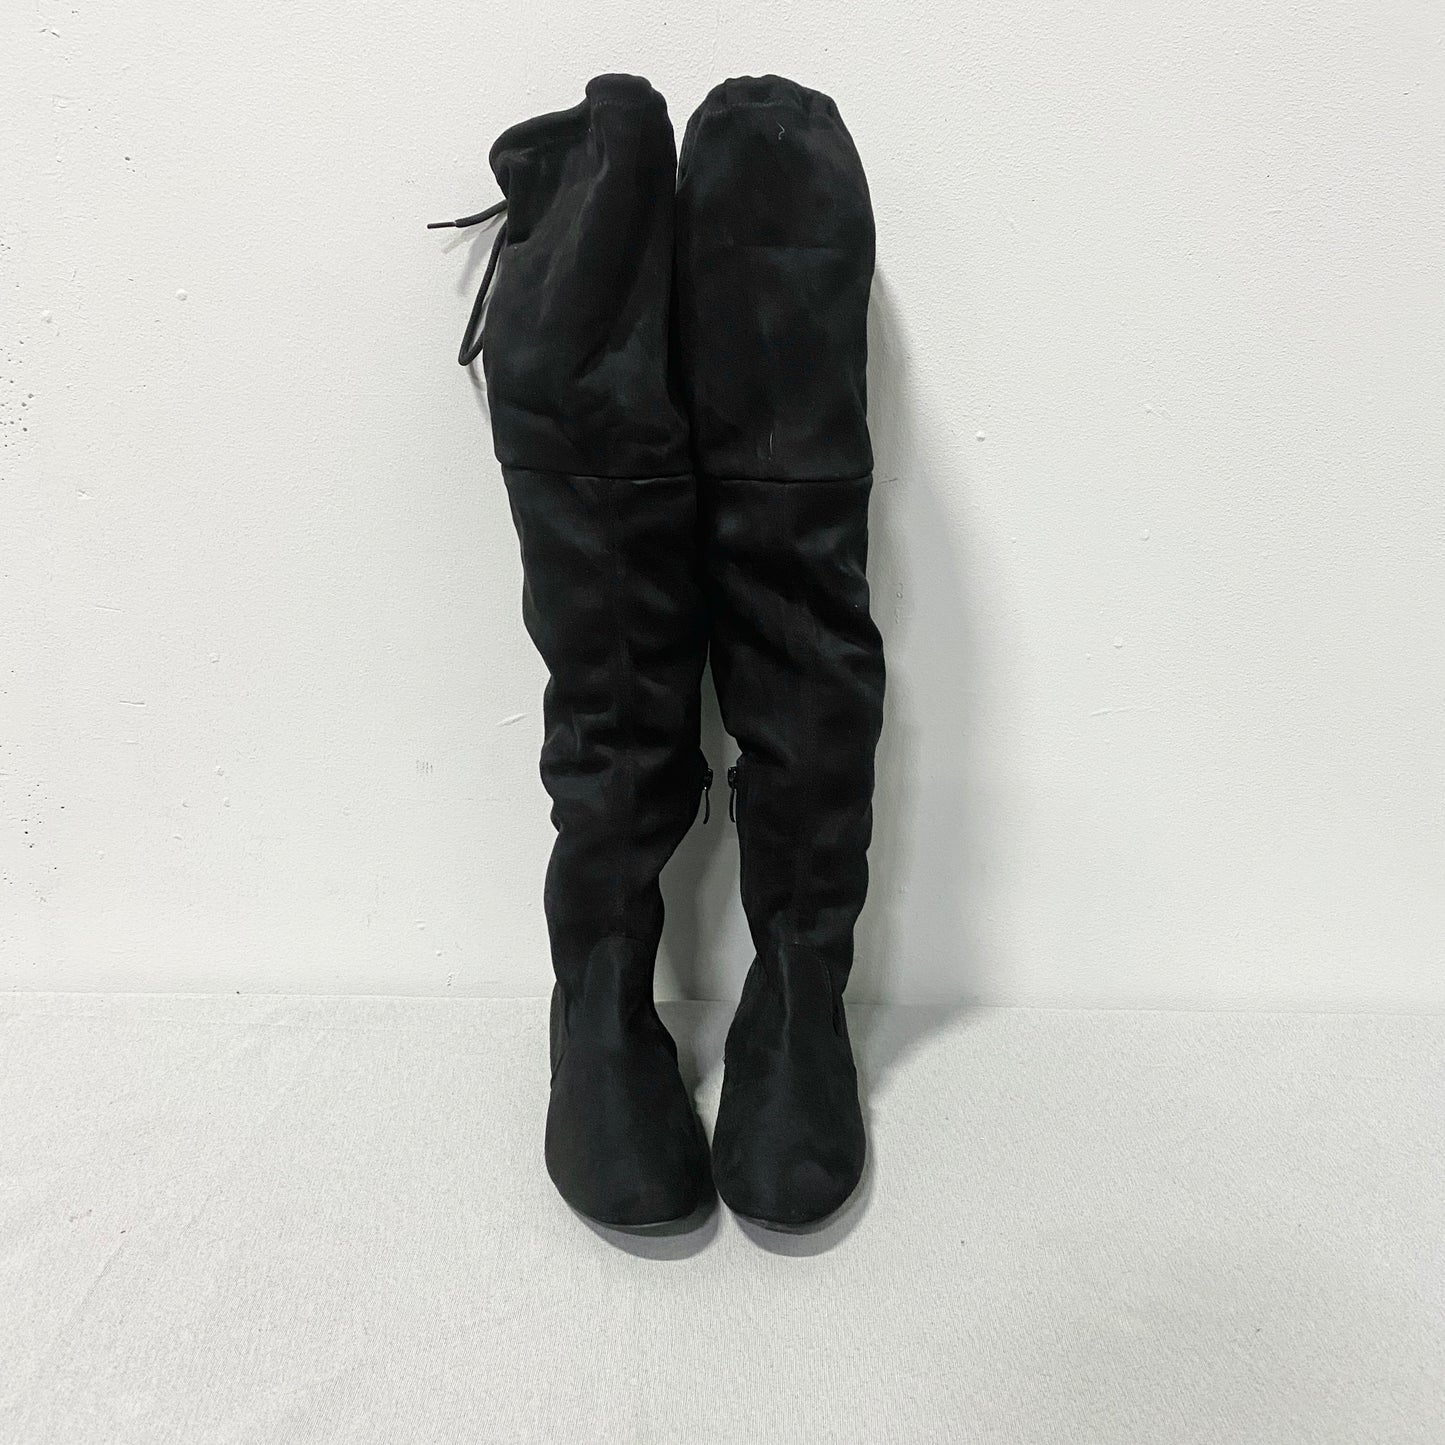 Women's Over The Knee Boots (Size 7)